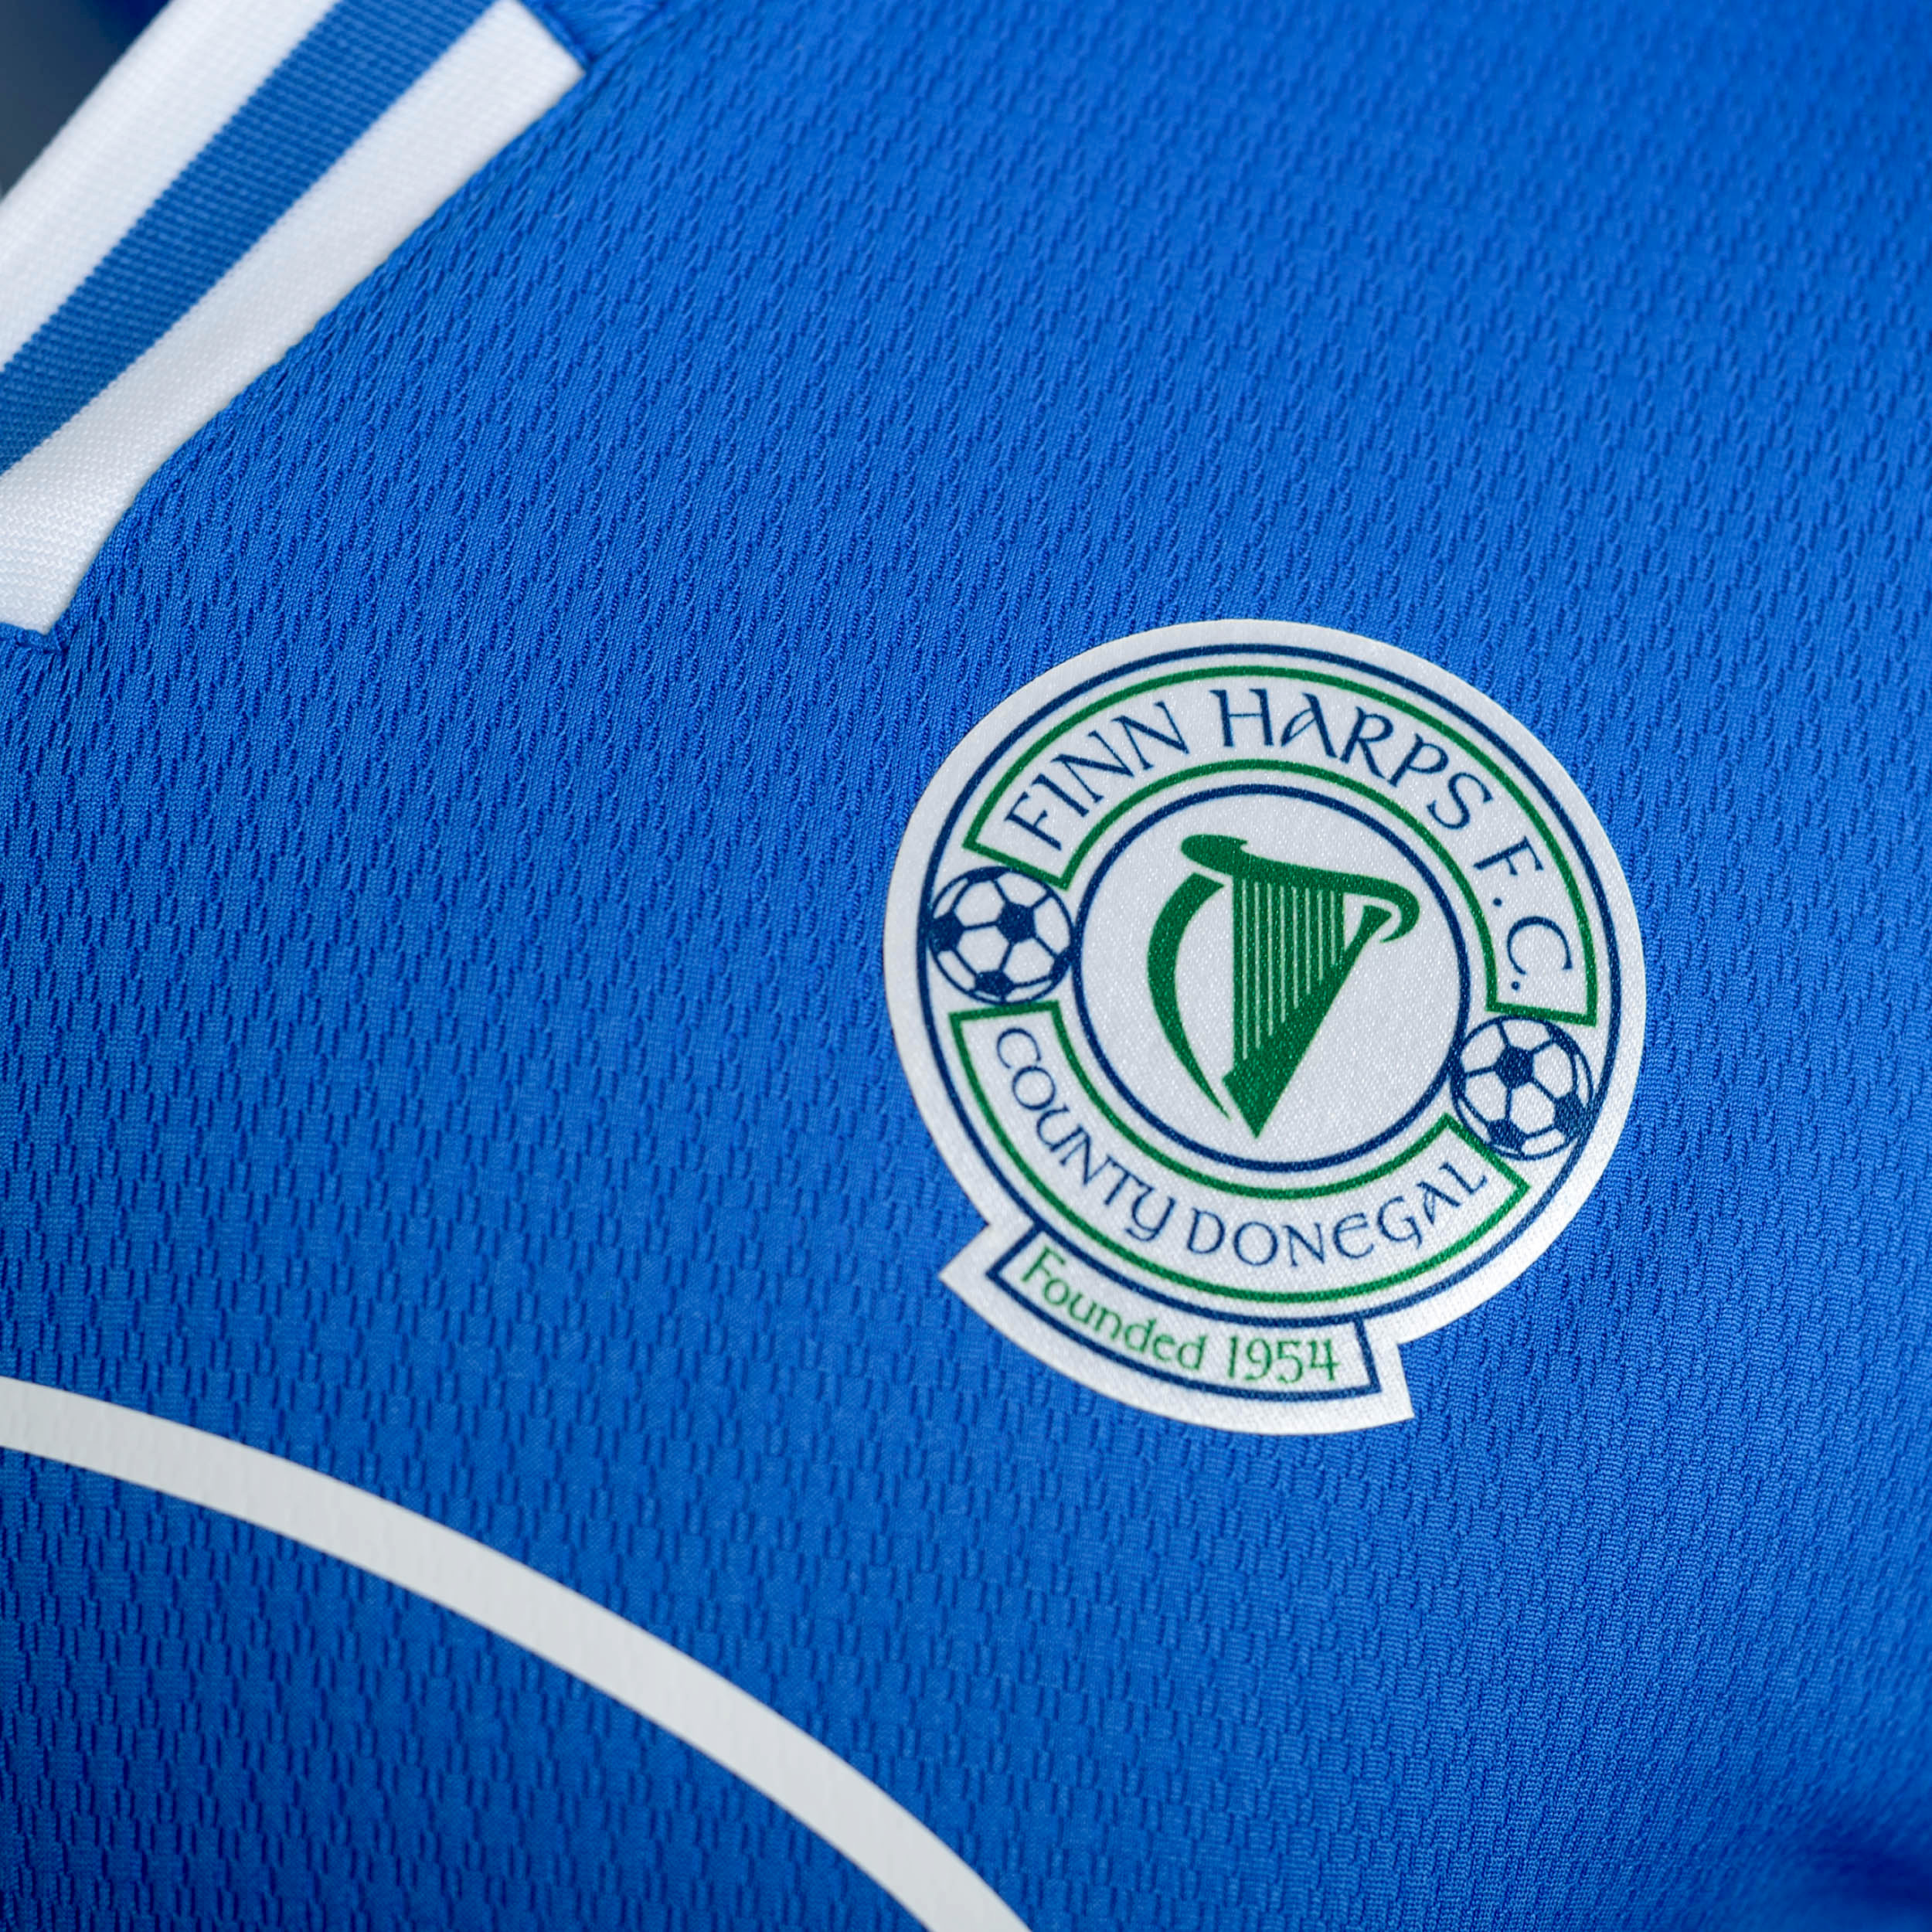 Finn Harps FC - A limited no of Jerseys now on sale from